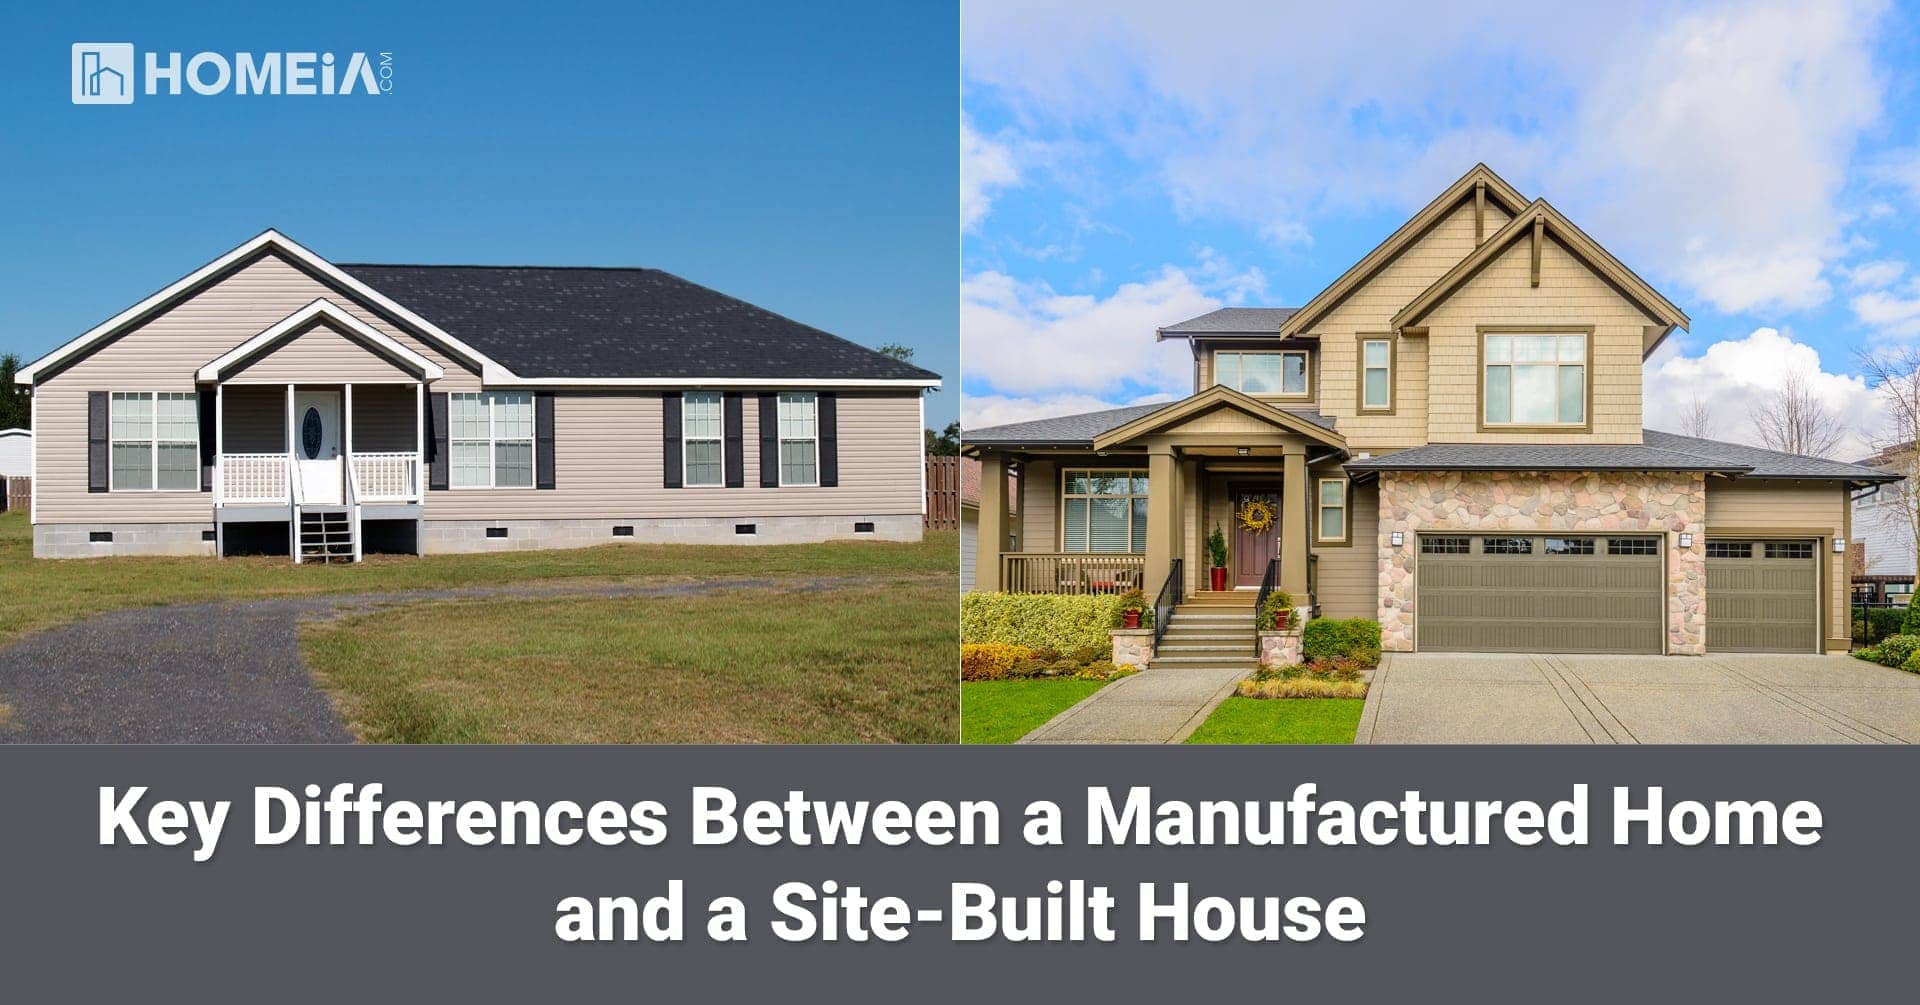 Key Differences Between a Manufactured Home and a Site-Built House